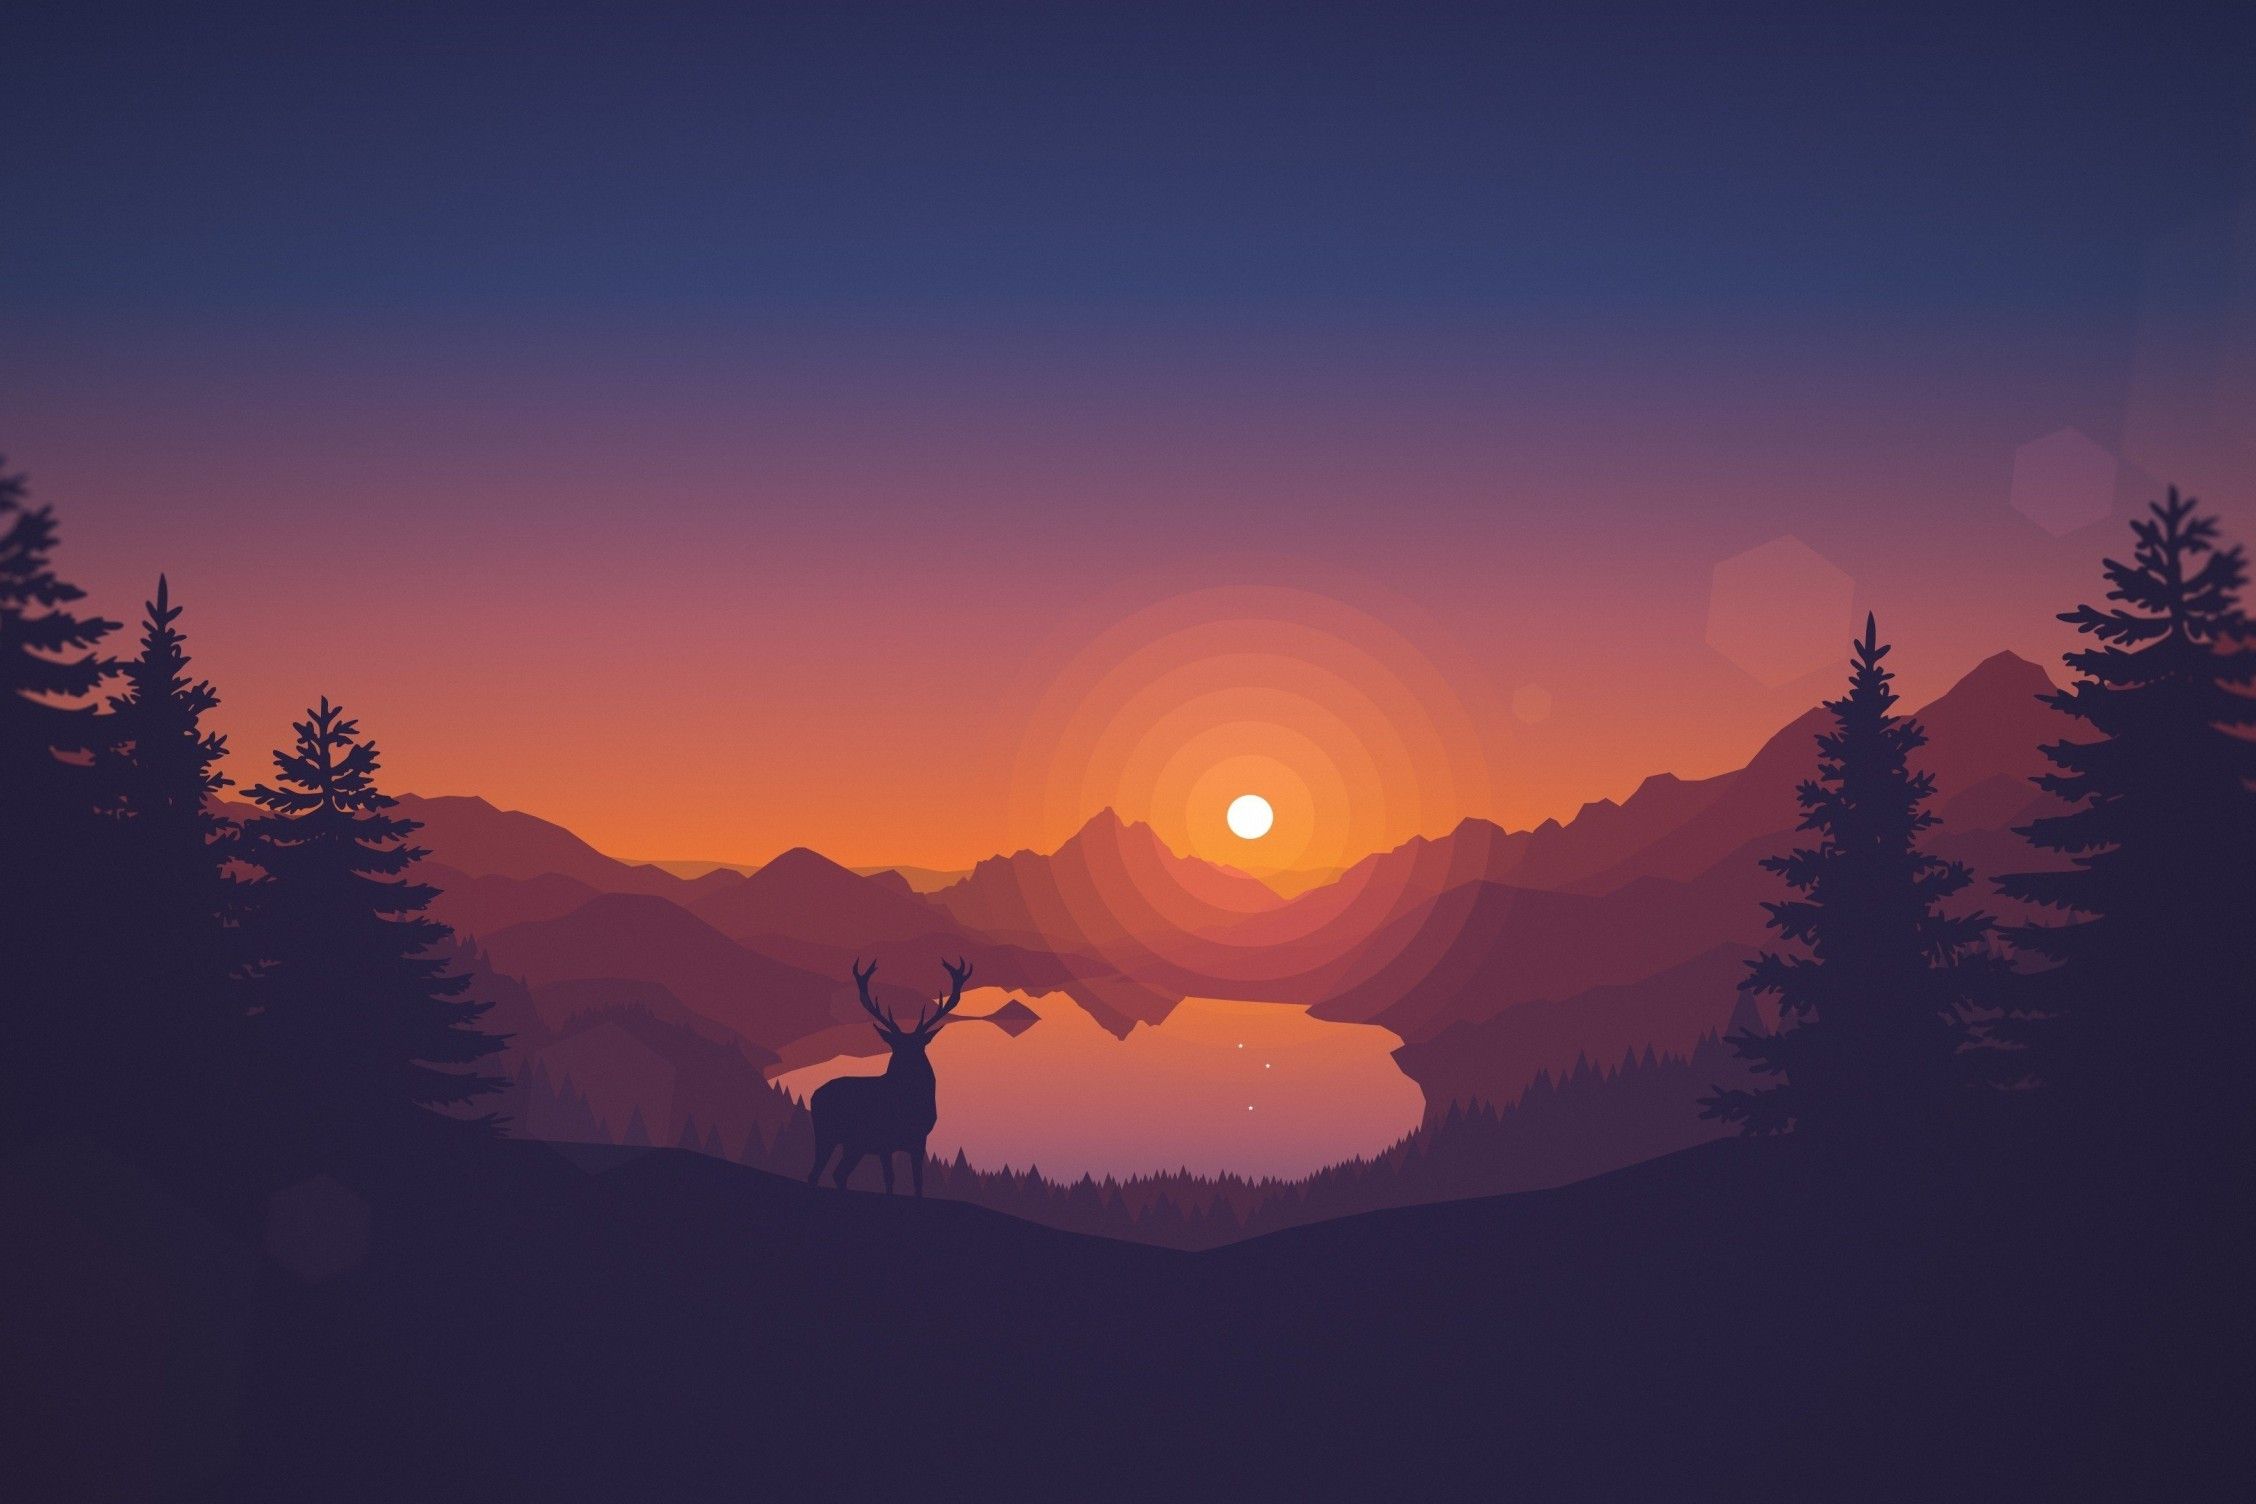 Download 2256x1504 Minimalism, Scenic, Toon Colors, Deer, Sun, Forest, Trees, Mountain Wallpaper